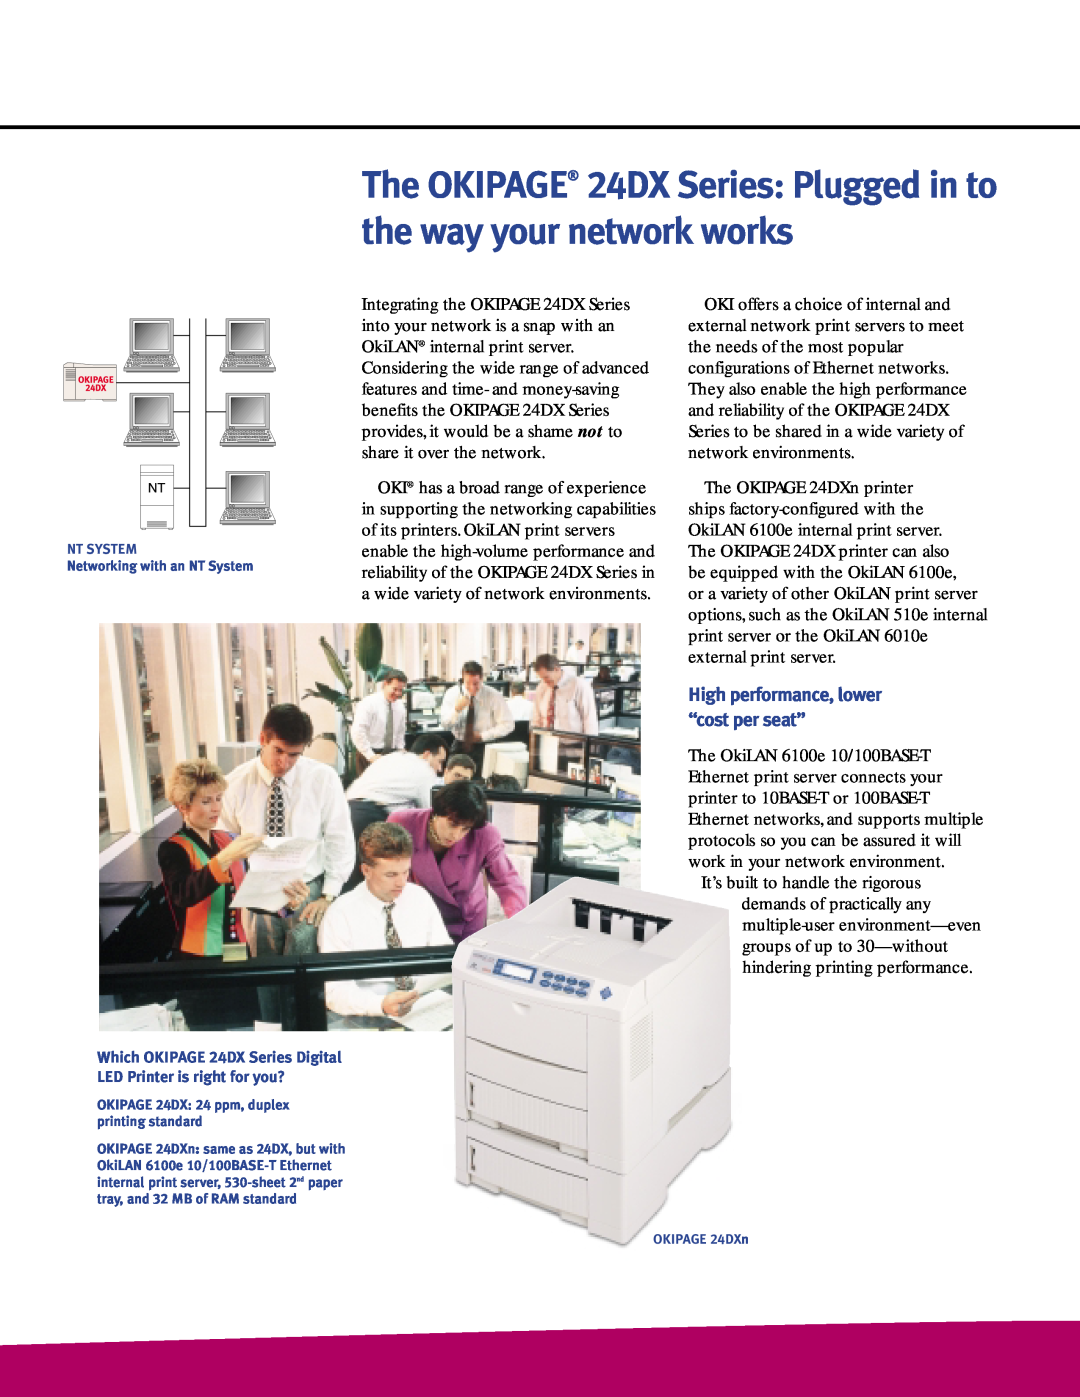 Oki brochure High performance, lower “cost per seat”, The OKIPAGE 24DX Series Plugged in to the way your network works 